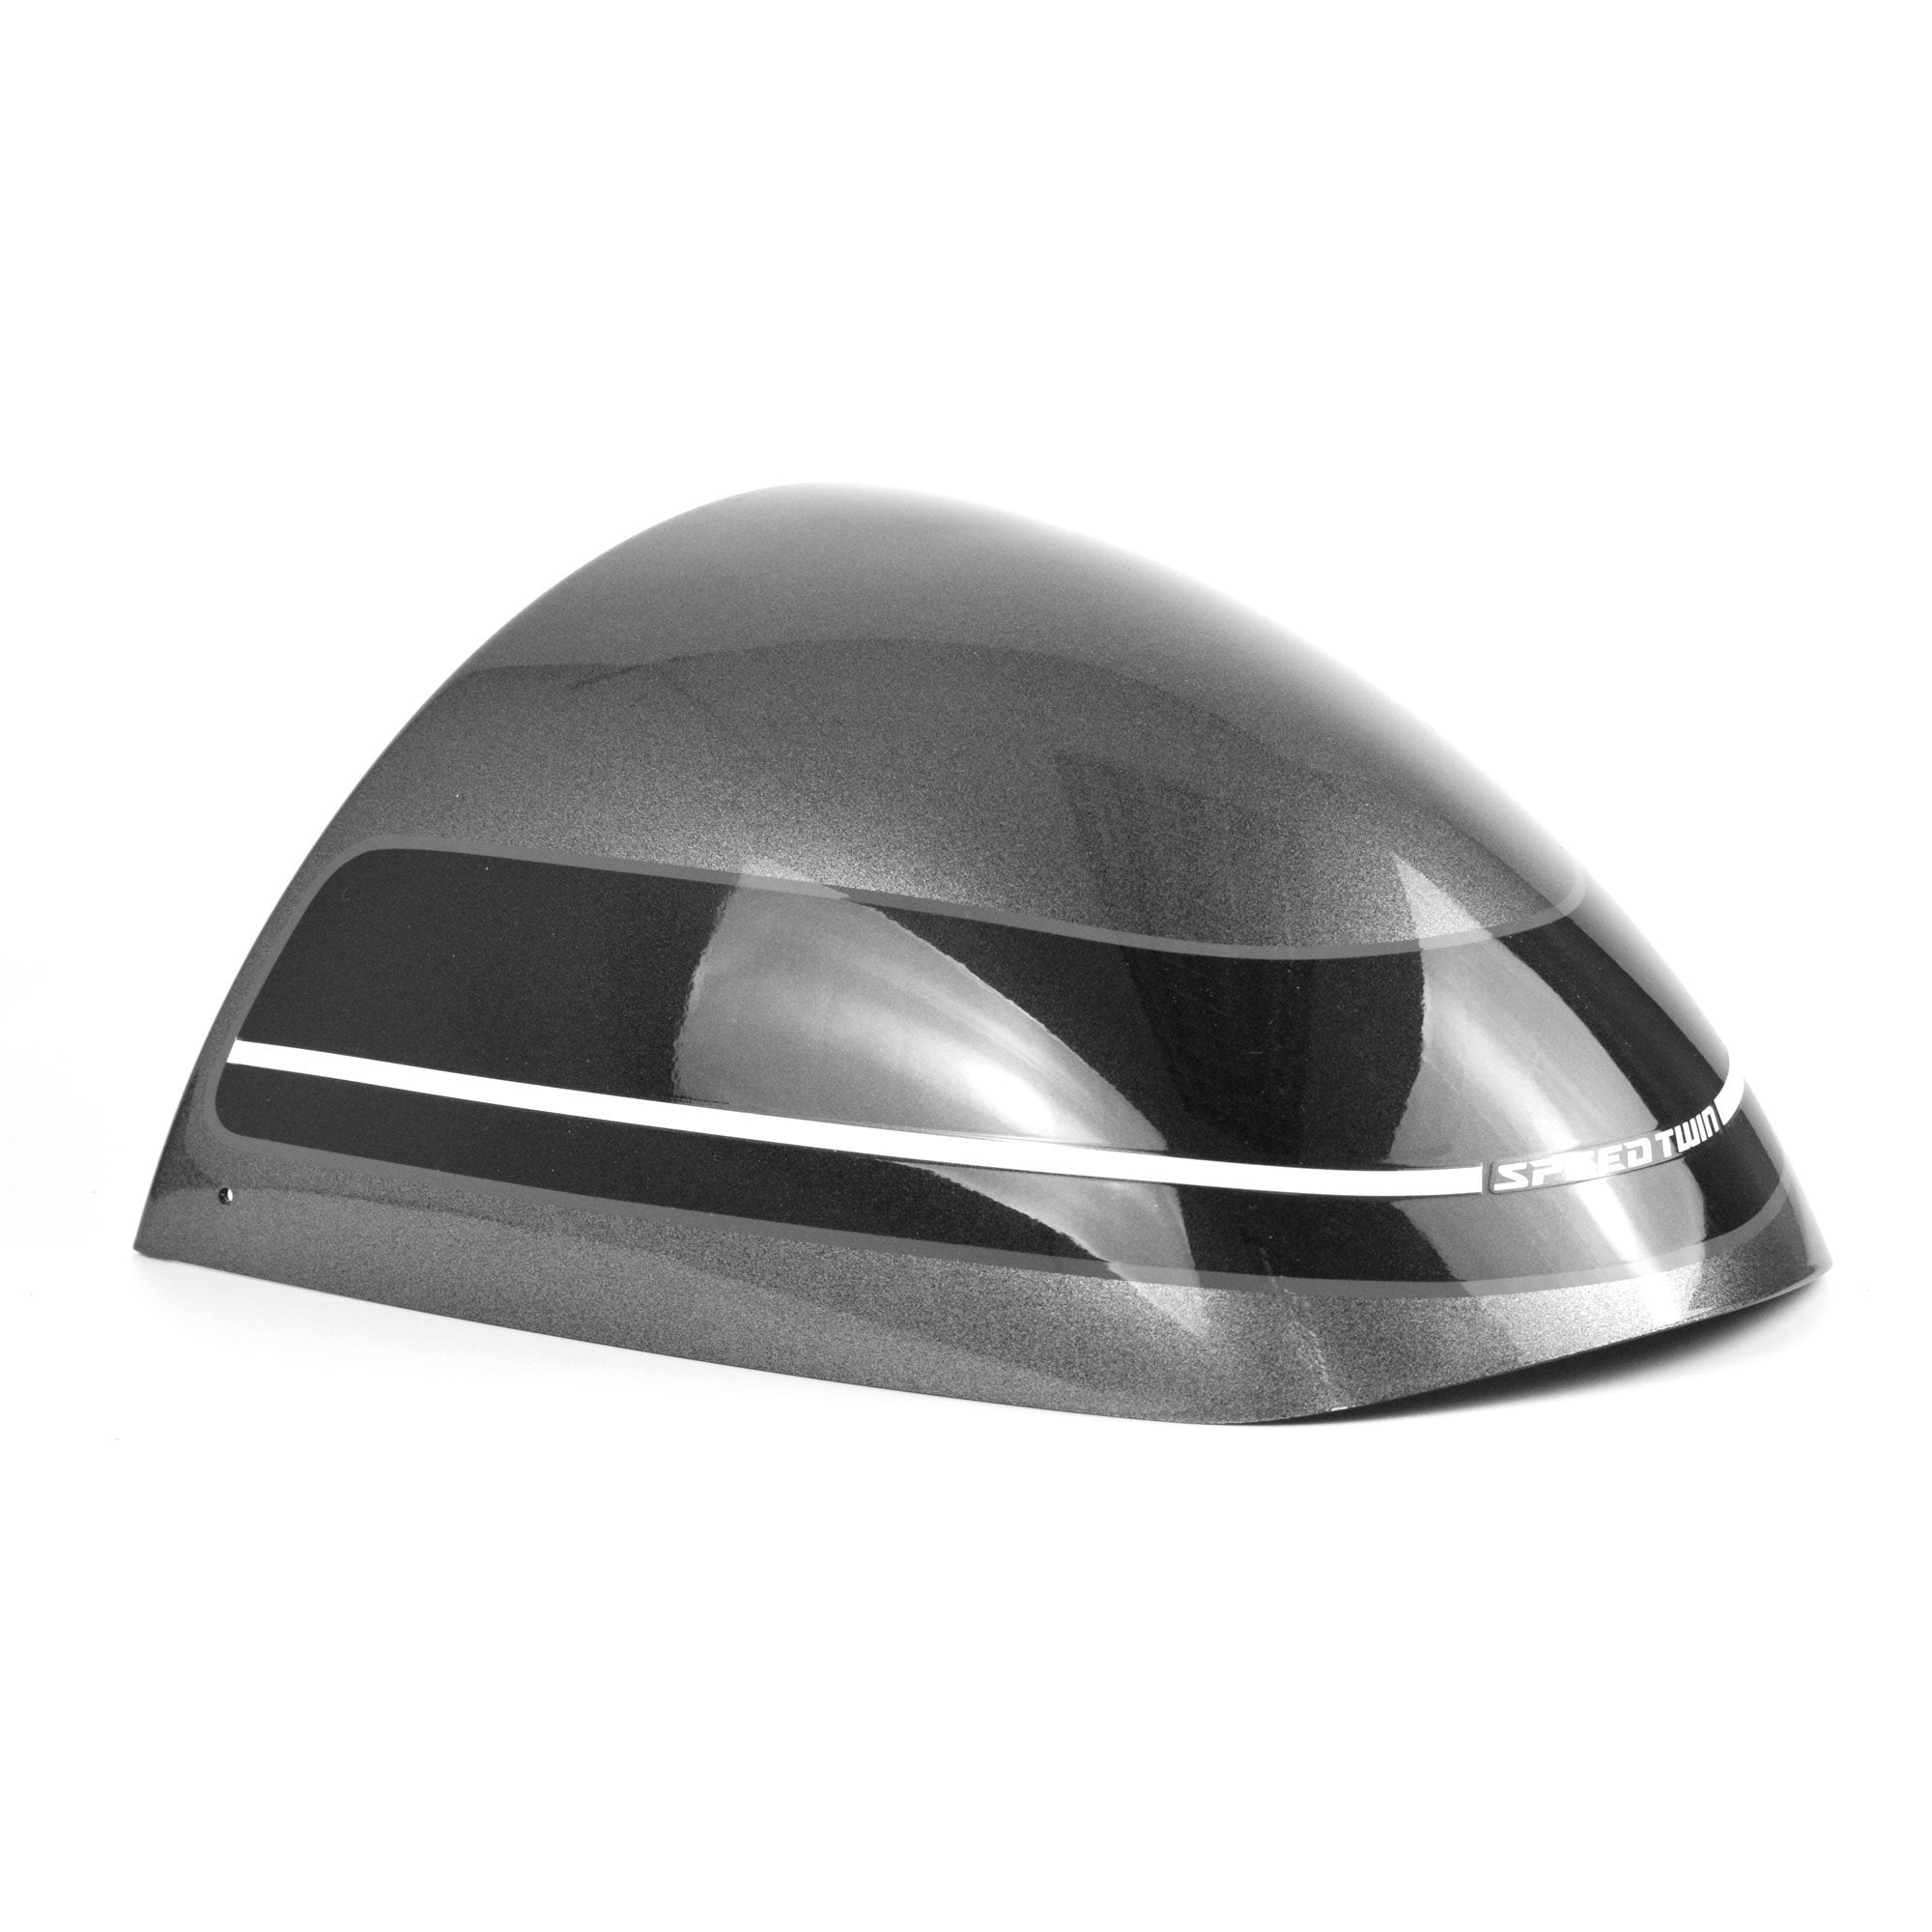 Pyramid Seat Cowl | Silver Ice & Storm Grey | Triumph Speed Twin 1200 2019>Current-16120G-Seat Cowls-Pyramid Motorcycle Accessories